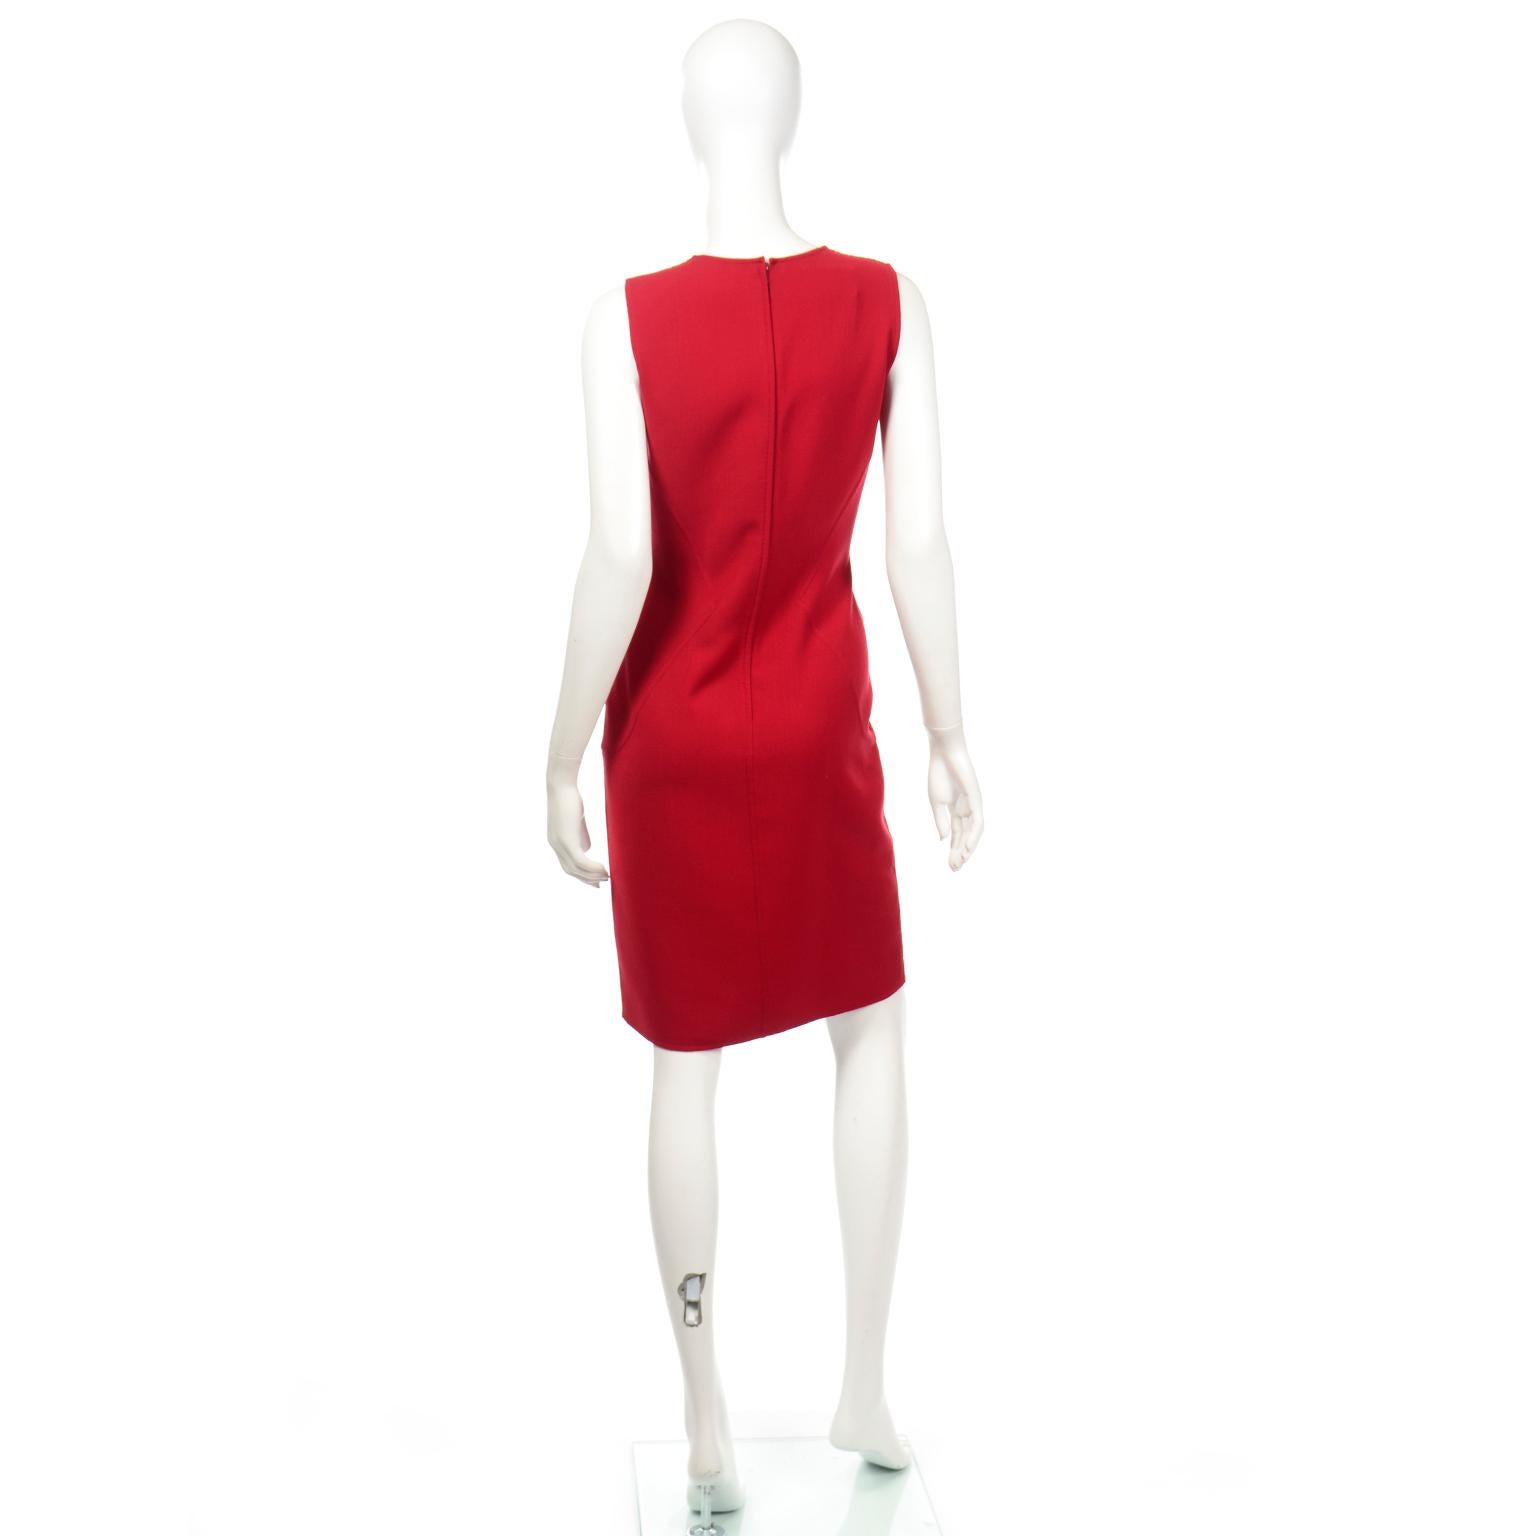 Oscar de la Renta Vintage Red Dress and Jacket / Coat Outfit In Excellent Condition For Sale In Portland, OR